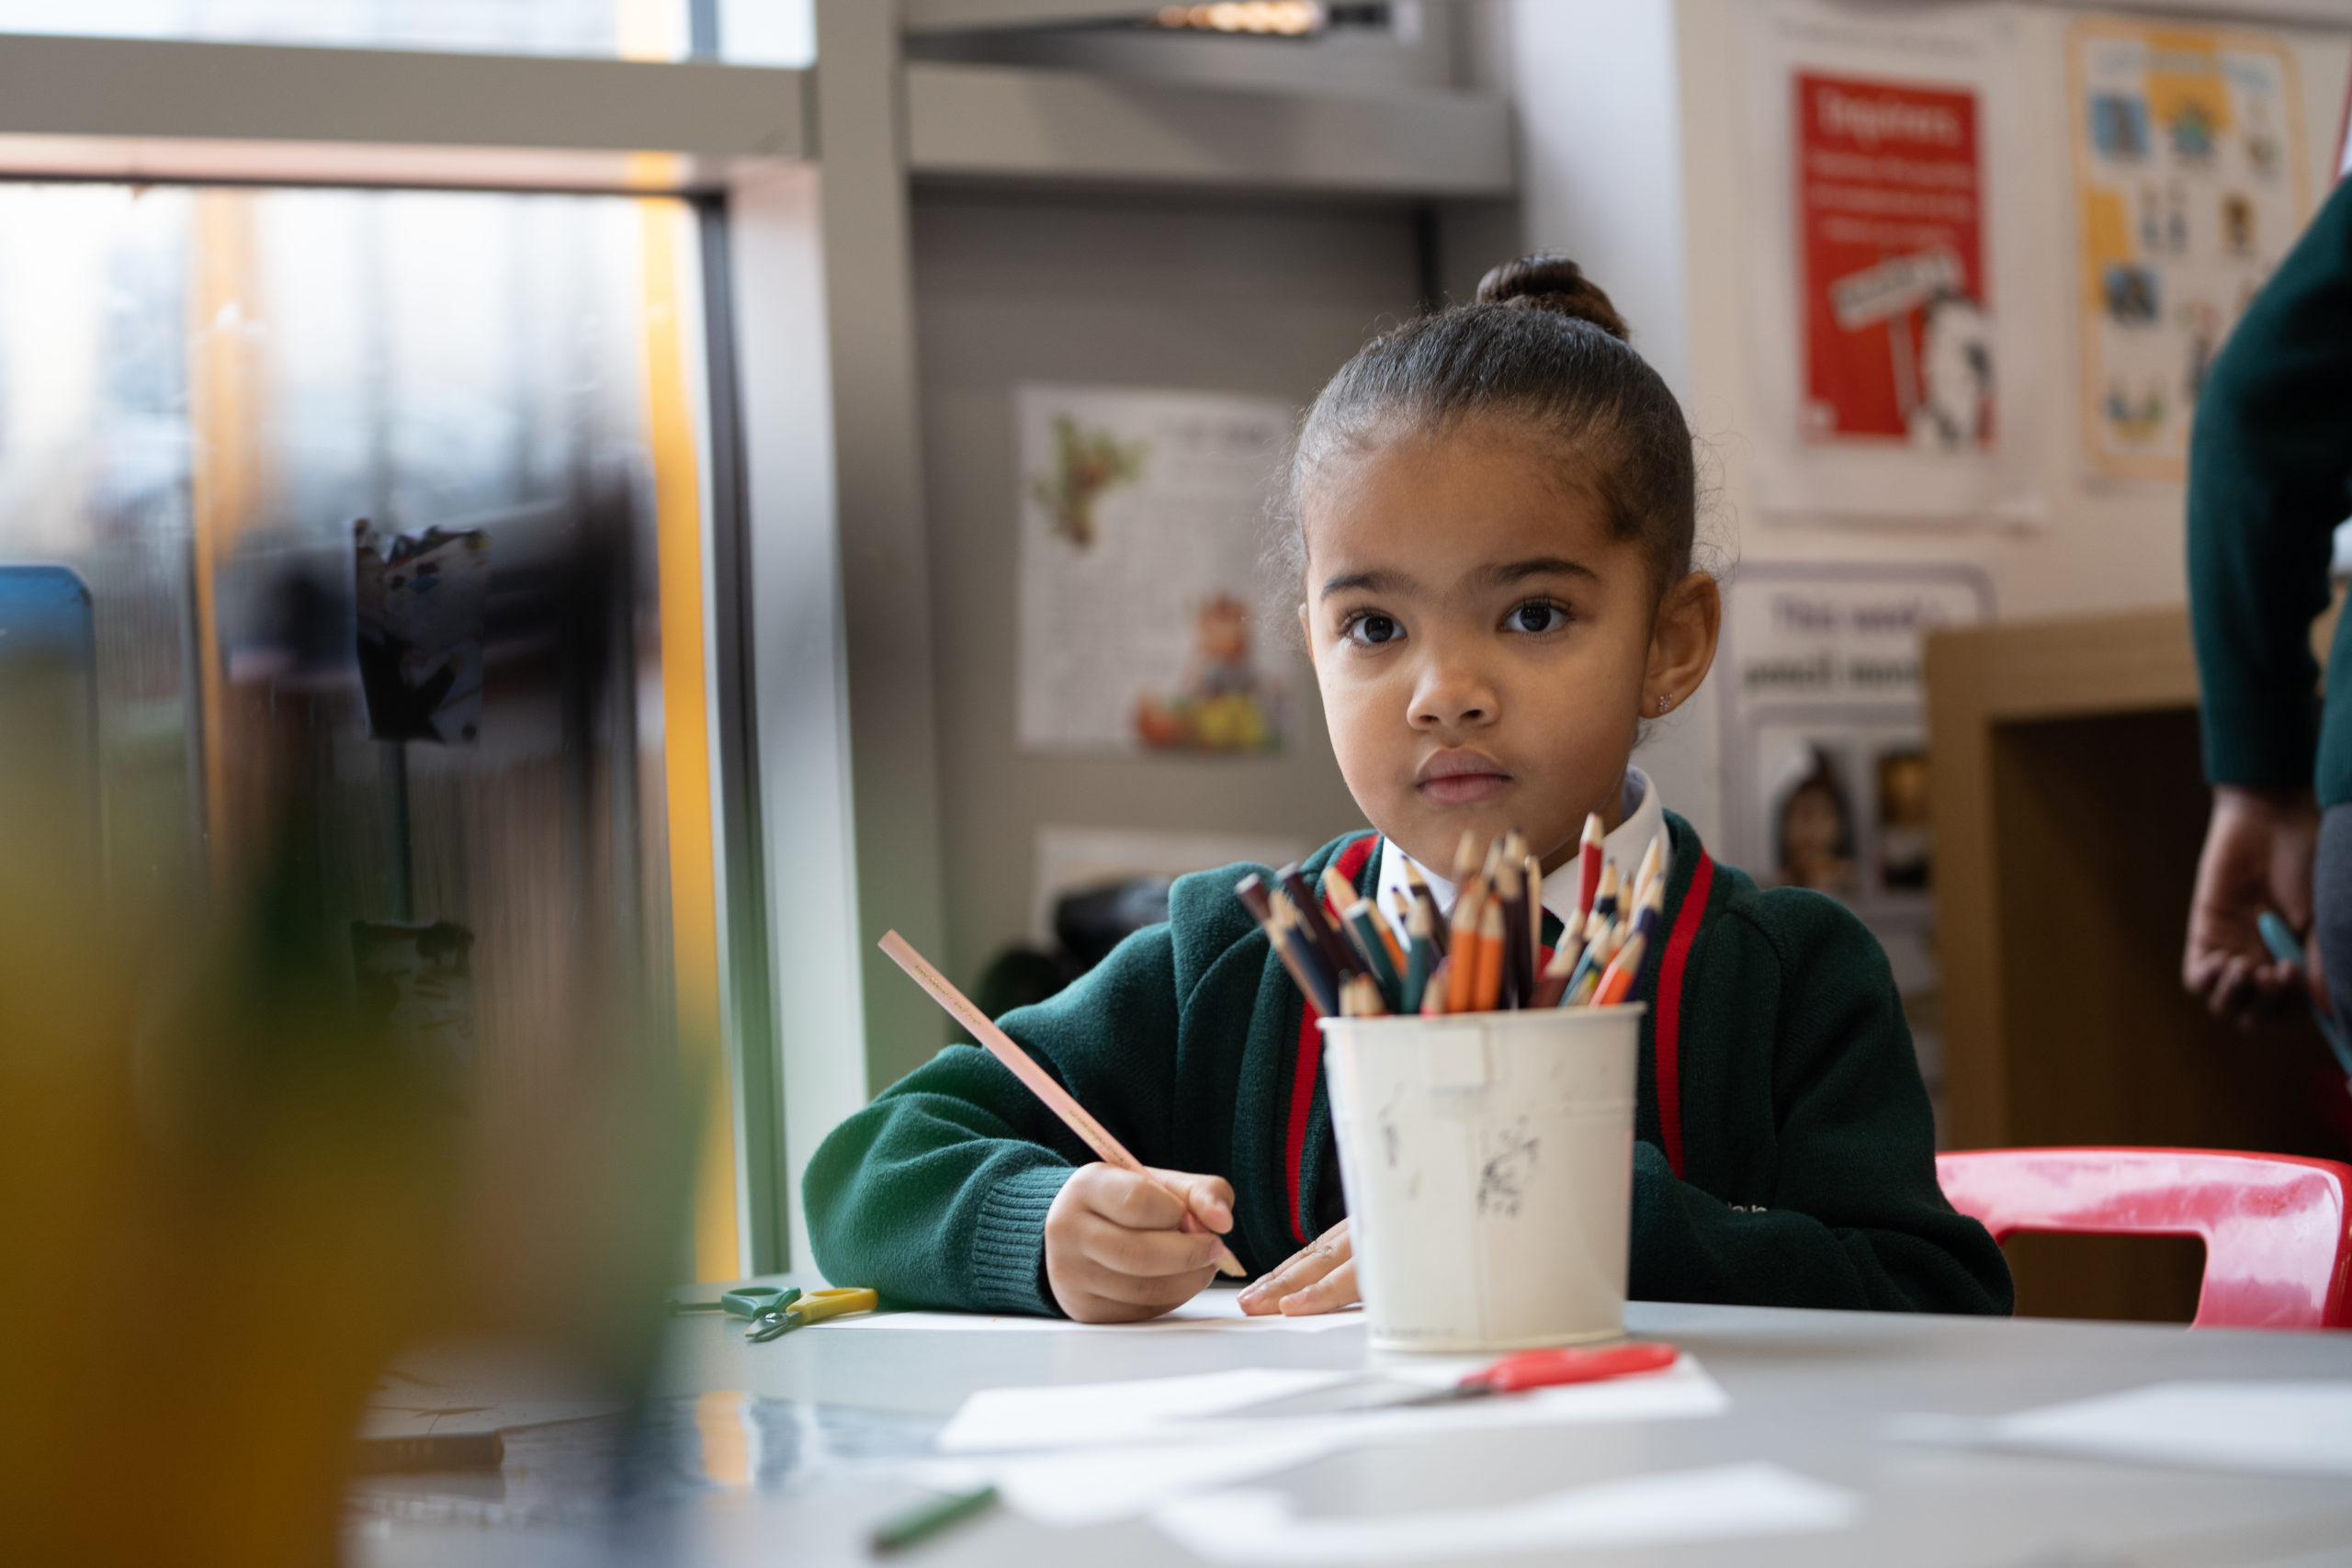 A young girl is shown sat at her desk, using coloured pencils to work on a piece of art she has created. She is looking directly at the camera.